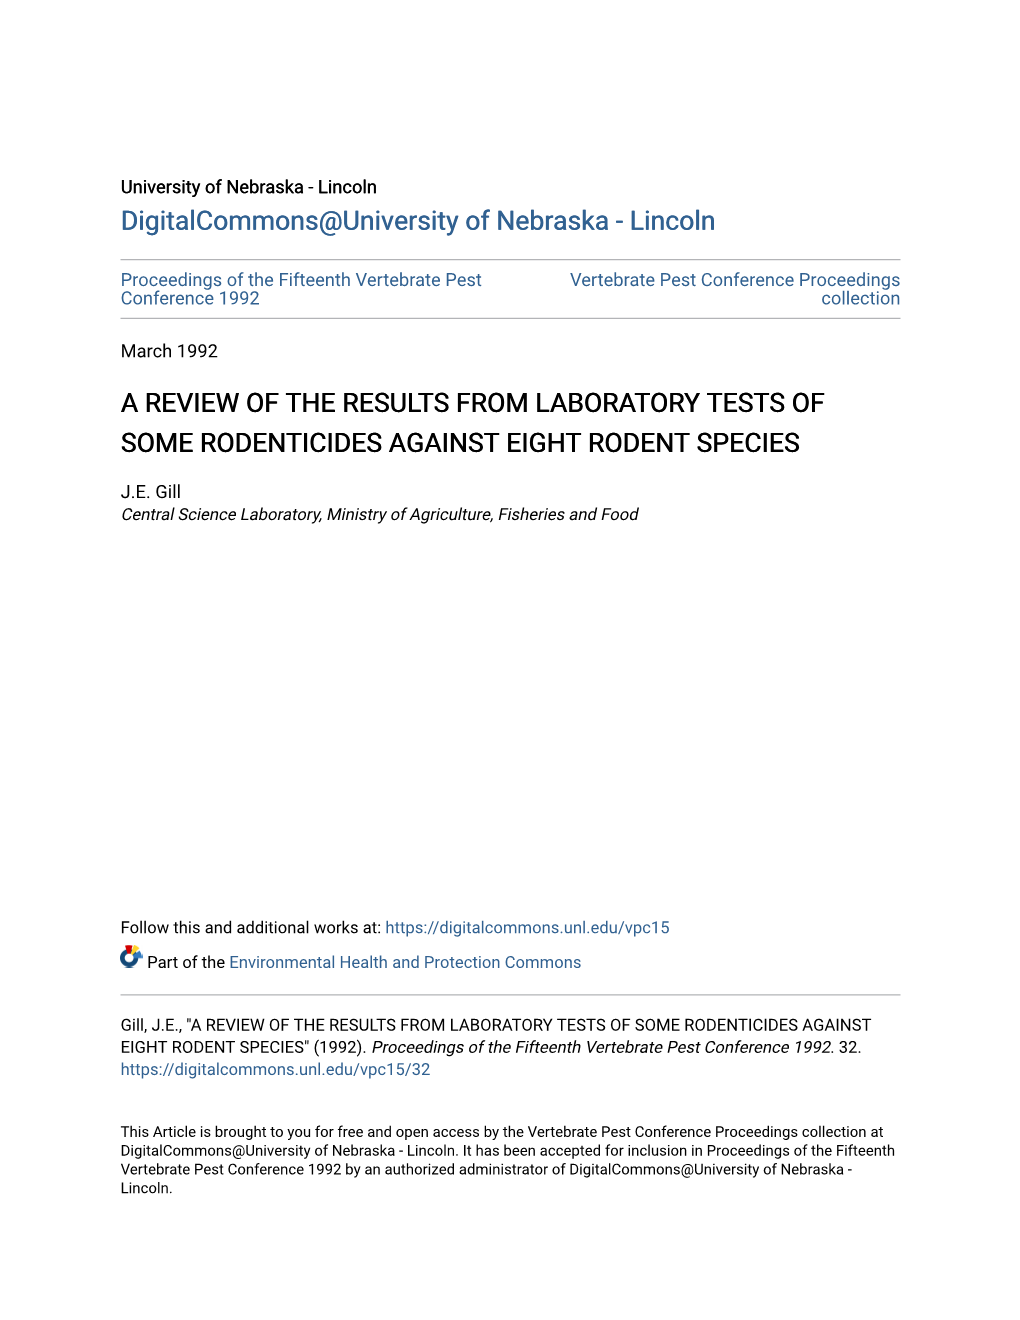 A Review of the Results from Laboratory Tests of Some Rodenticides Against Eight Rodent Species